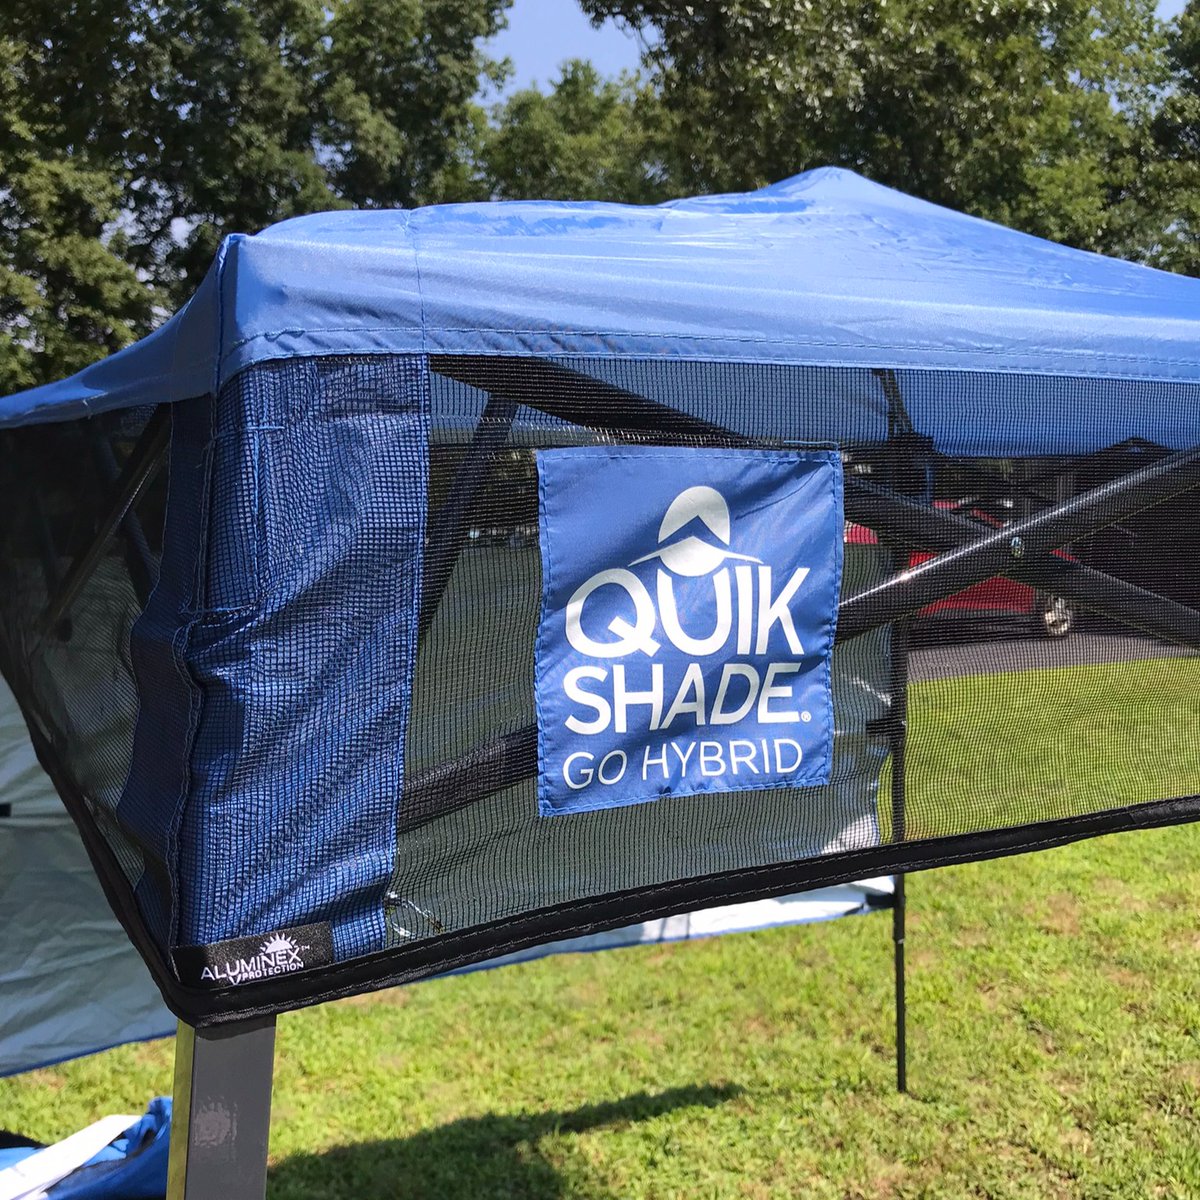 GO HYBRID this Spring for sports, family time or any occasion you need some Quik Shade 😉
bit.ly/49IAR4c

#GoHybrid #Quikshade #Shelterlogic #Popupcanopy